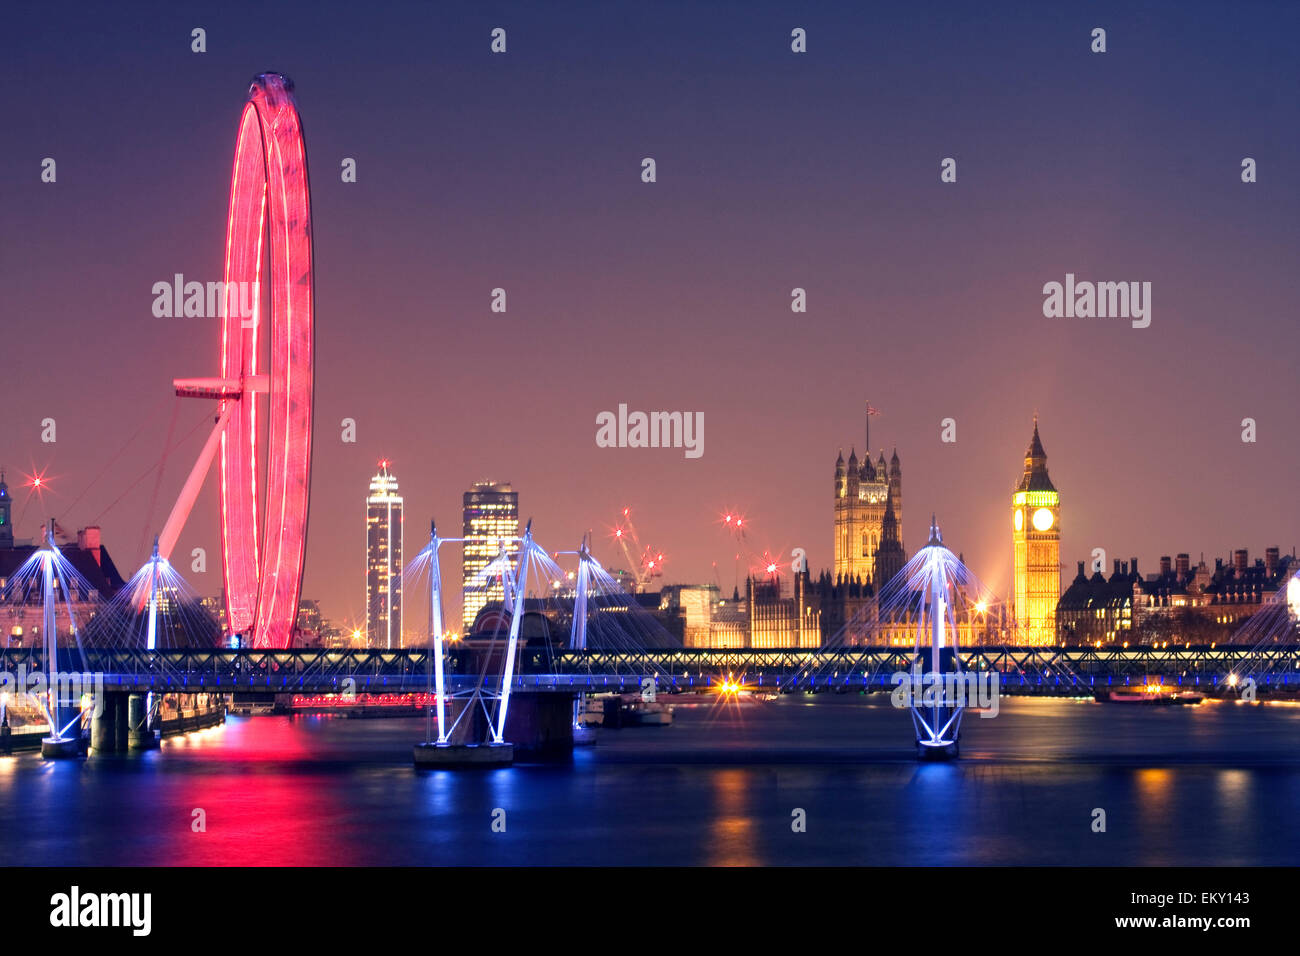 London at night. London Eye Hungerford Bridge and Golden Jubilee Bridges and Palace of Westminster with illuminated Big Ben, UK Stock Photo